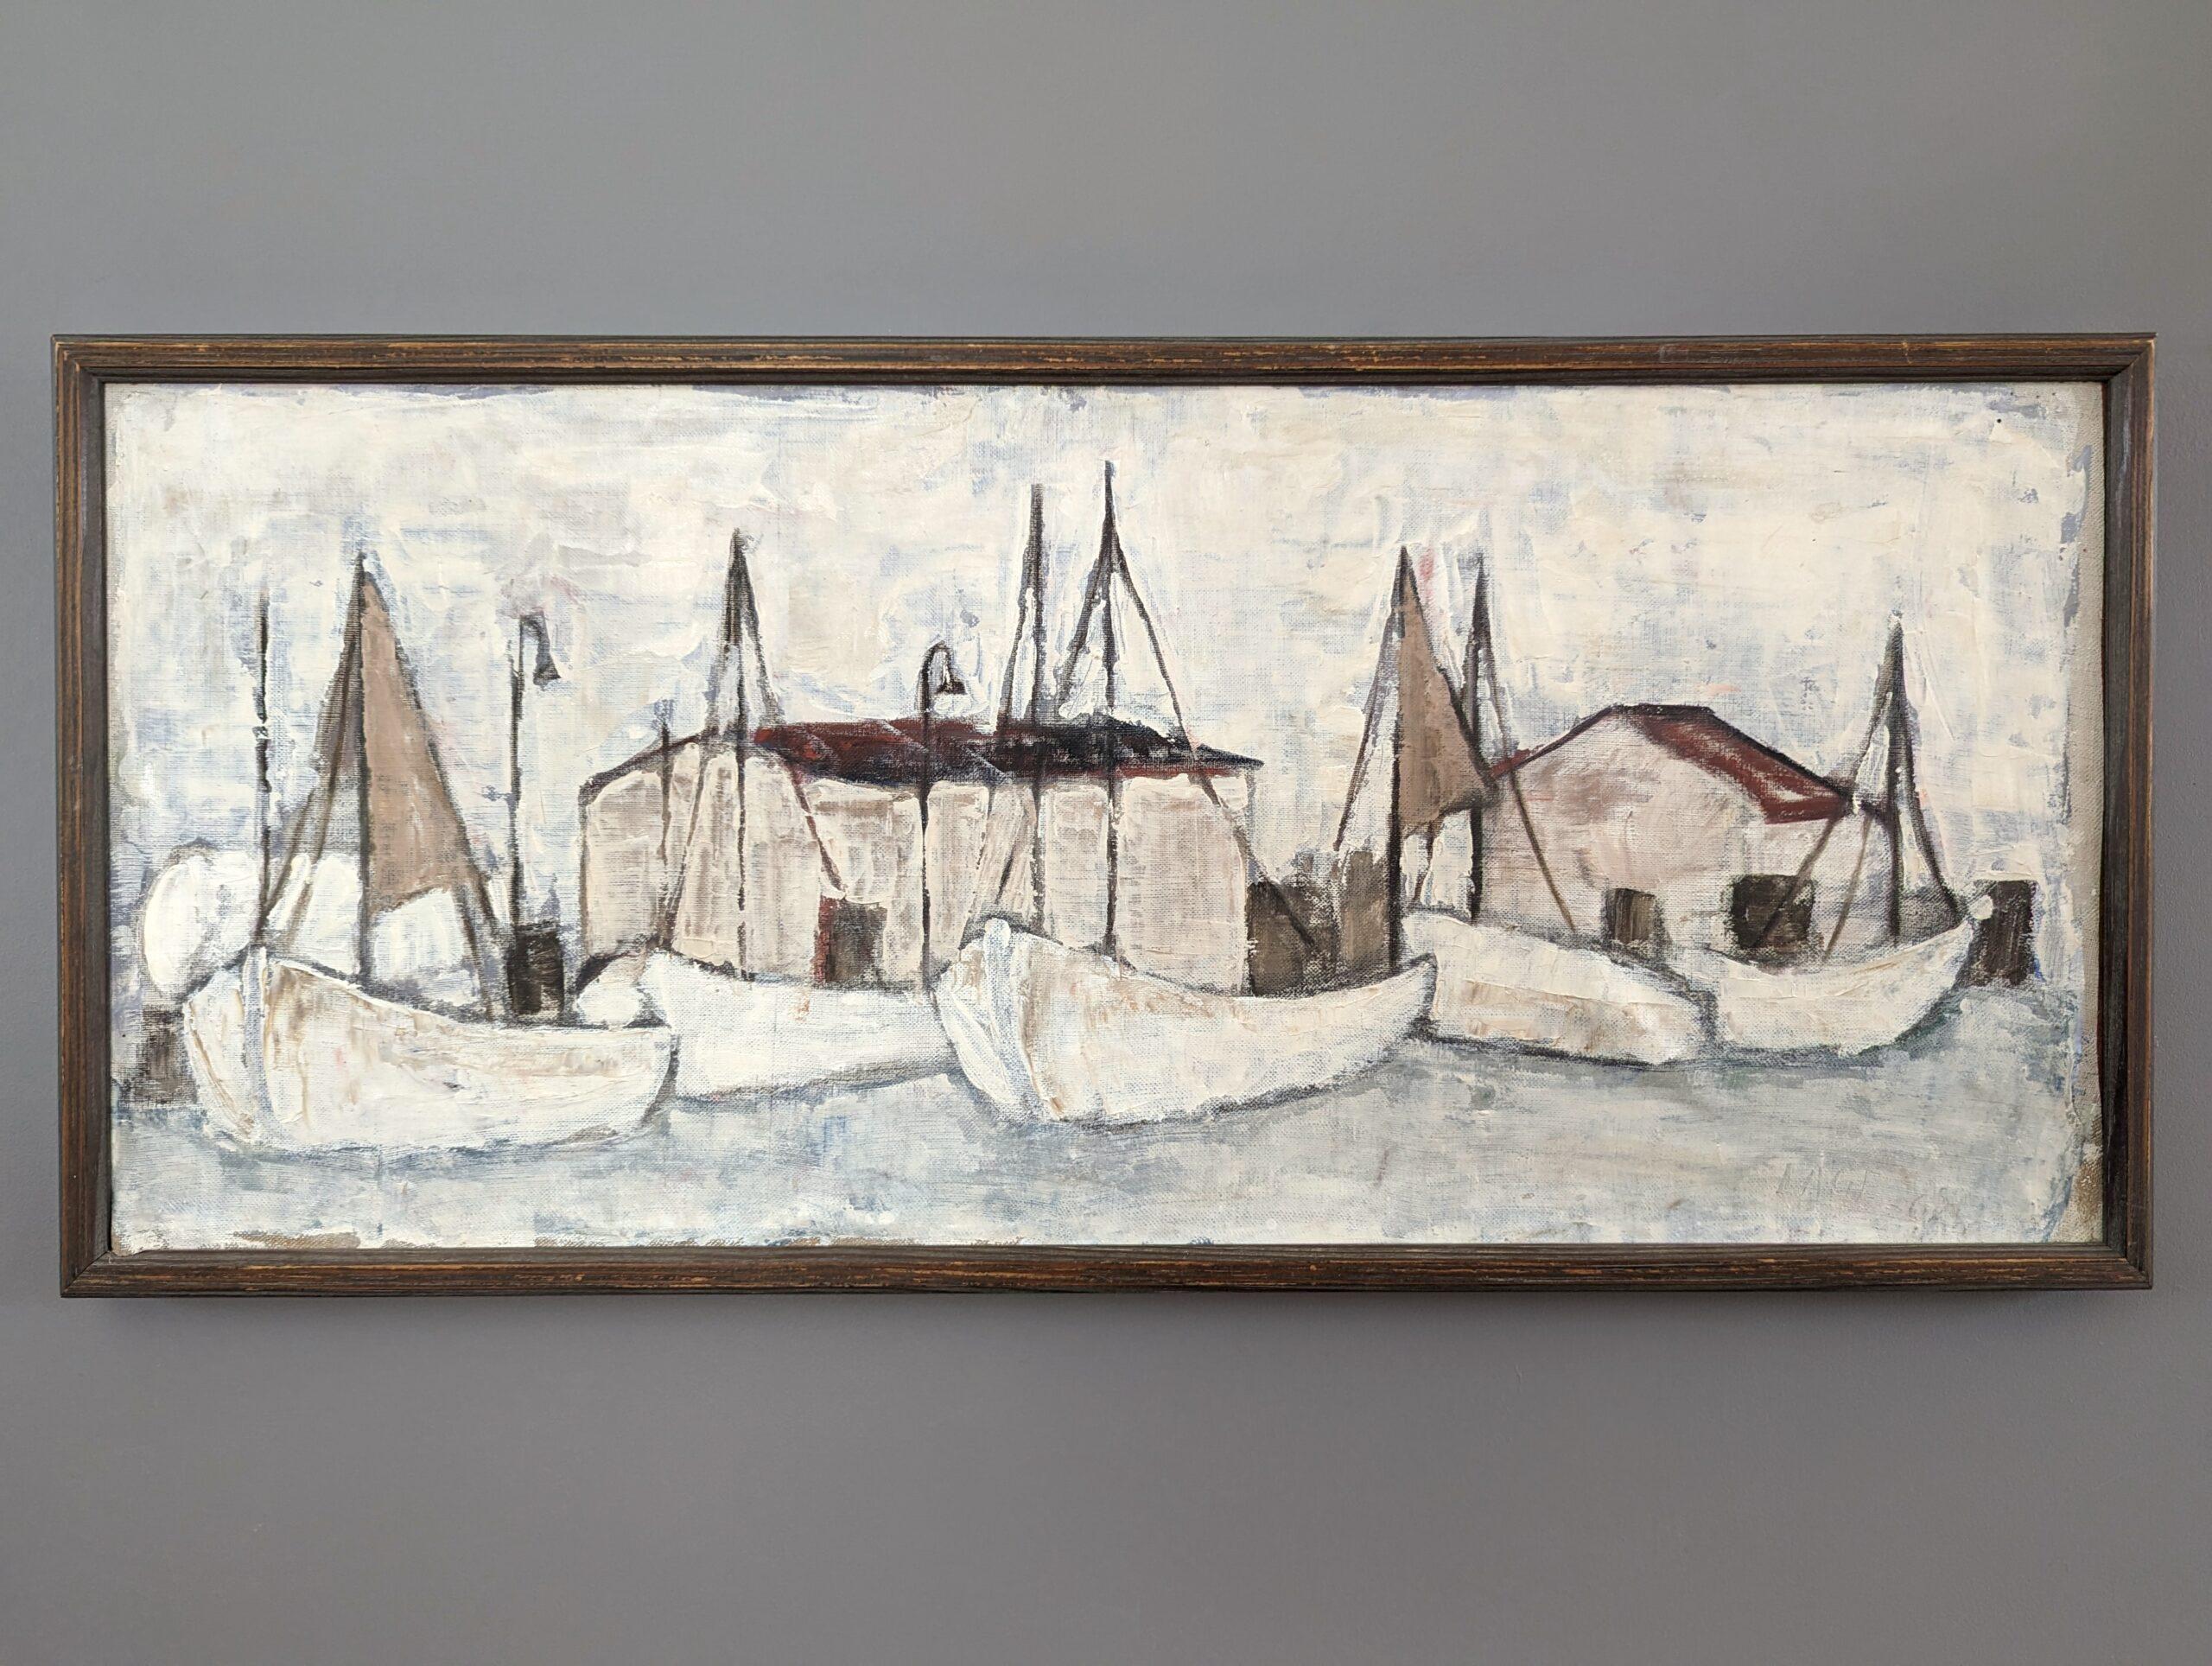 FISHING PORT
Size: 32 x 70 cm (including frame)
Oil on Board 

A serene mid-century seascape composition, executed in oil onto canvas that has been laid to board.

Simple yet effective in its composition, the artist skilfully captures some fishing